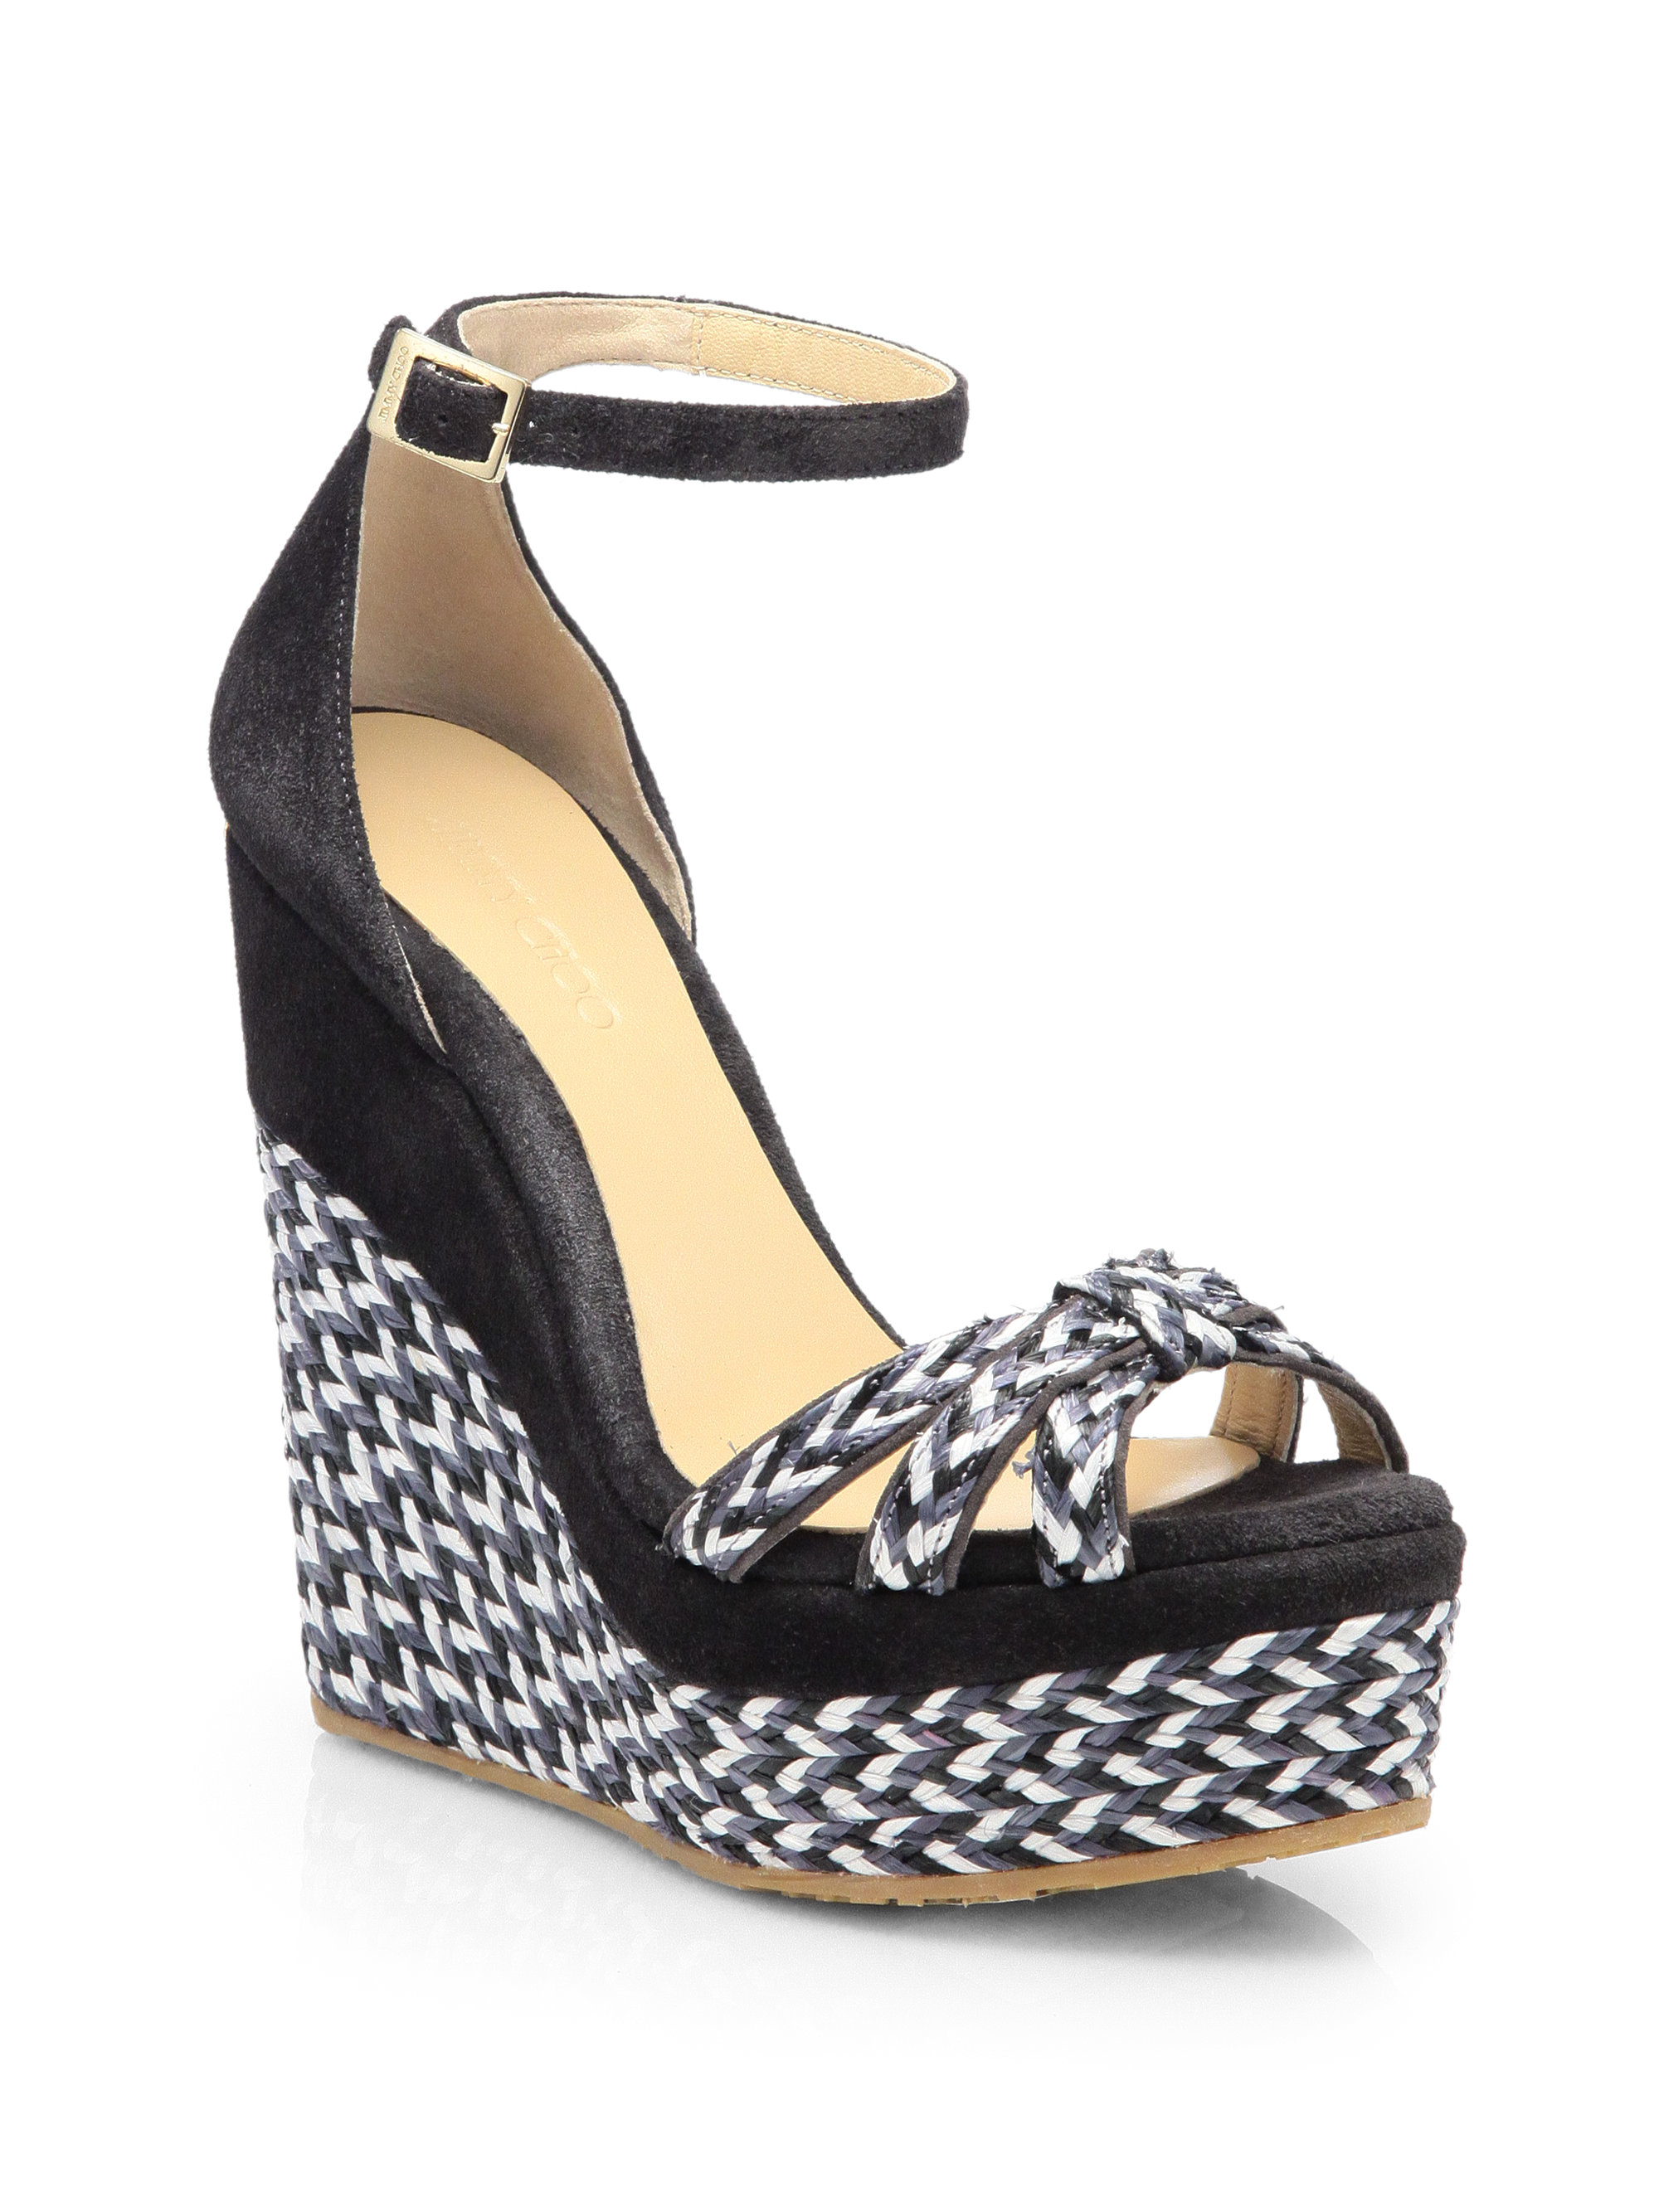 Jimmy Choo Promise Suede Woven Espadrille Wedge Sandals in Black ...